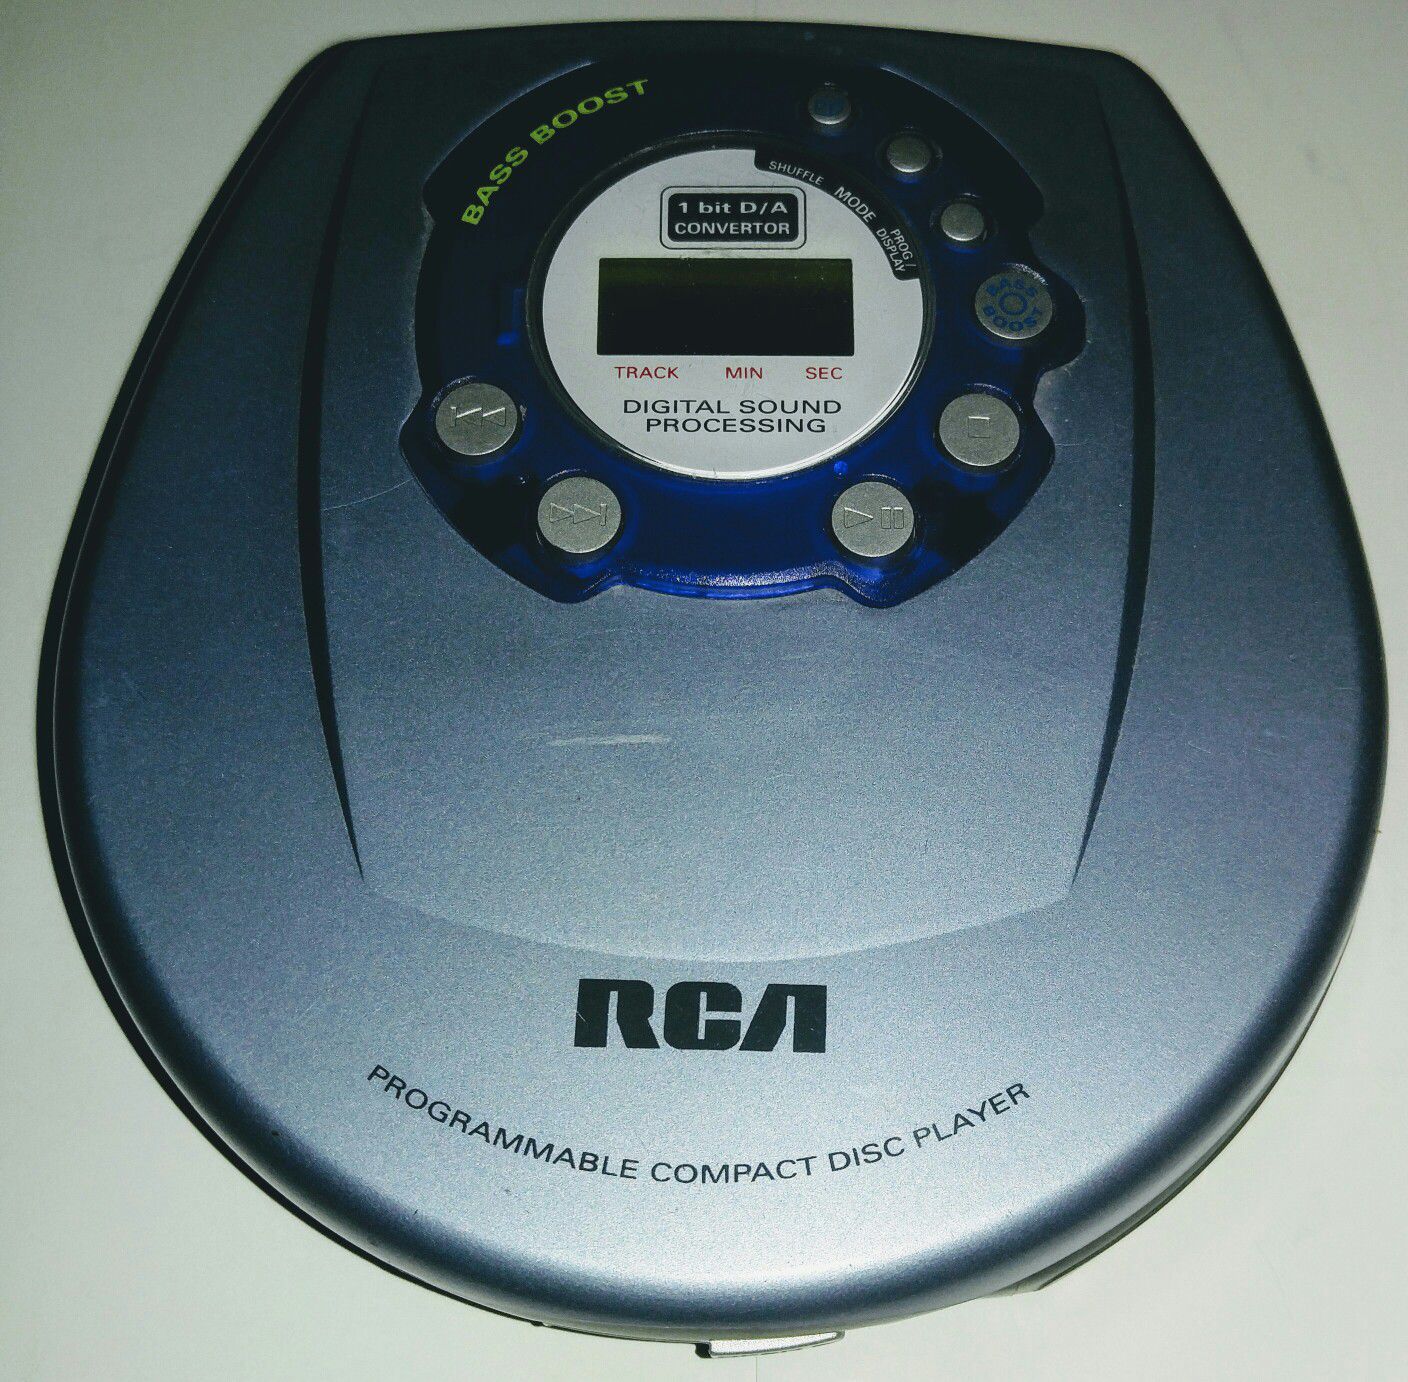 RCA Programmable Compact Disk Player